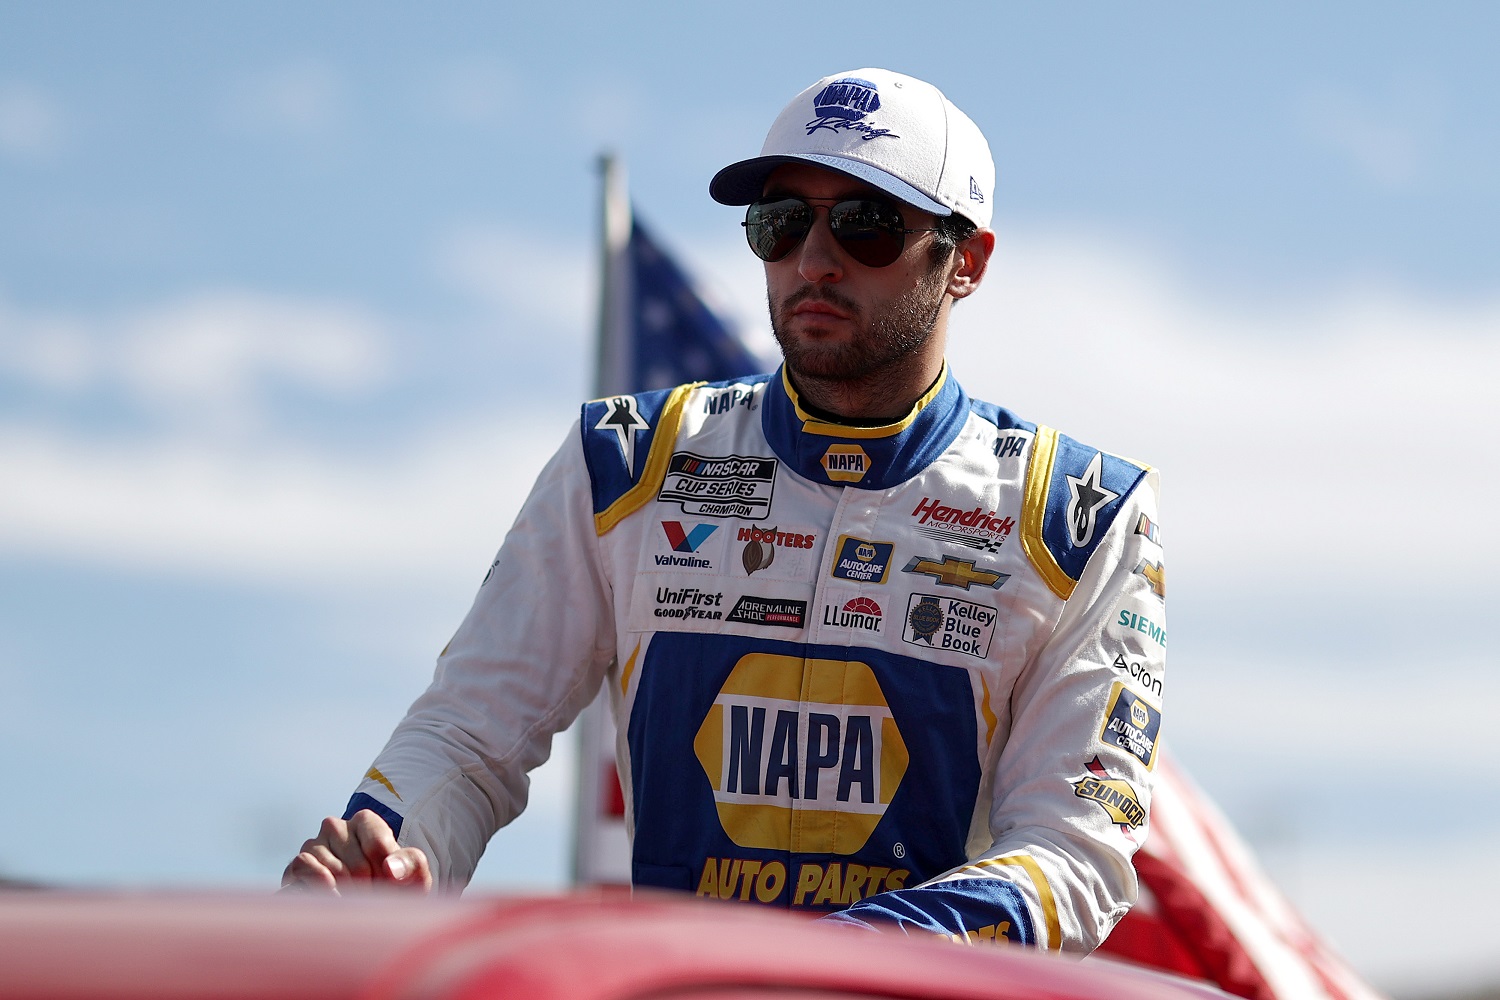 Chase Elliott, driver of the No. 9 Chevrolet, makes his Championship 4 introduction parade lap prior prior to the NASCAR Cup Series Championship at Phoenix Raceway on Nov. 7, 2021.